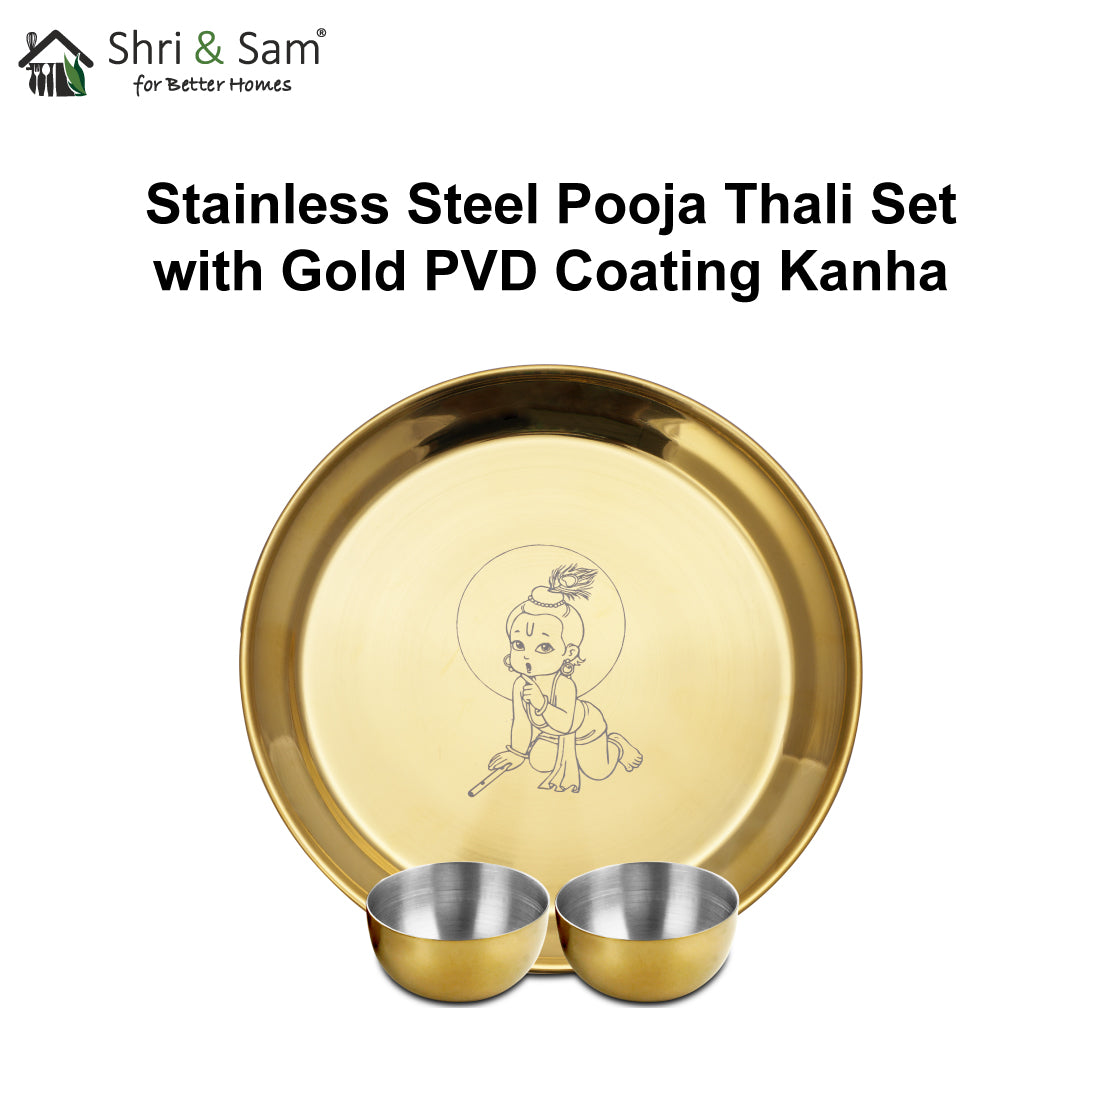 Stainless Steel Pooja Thali Set with Gold PVD Coating Kanha